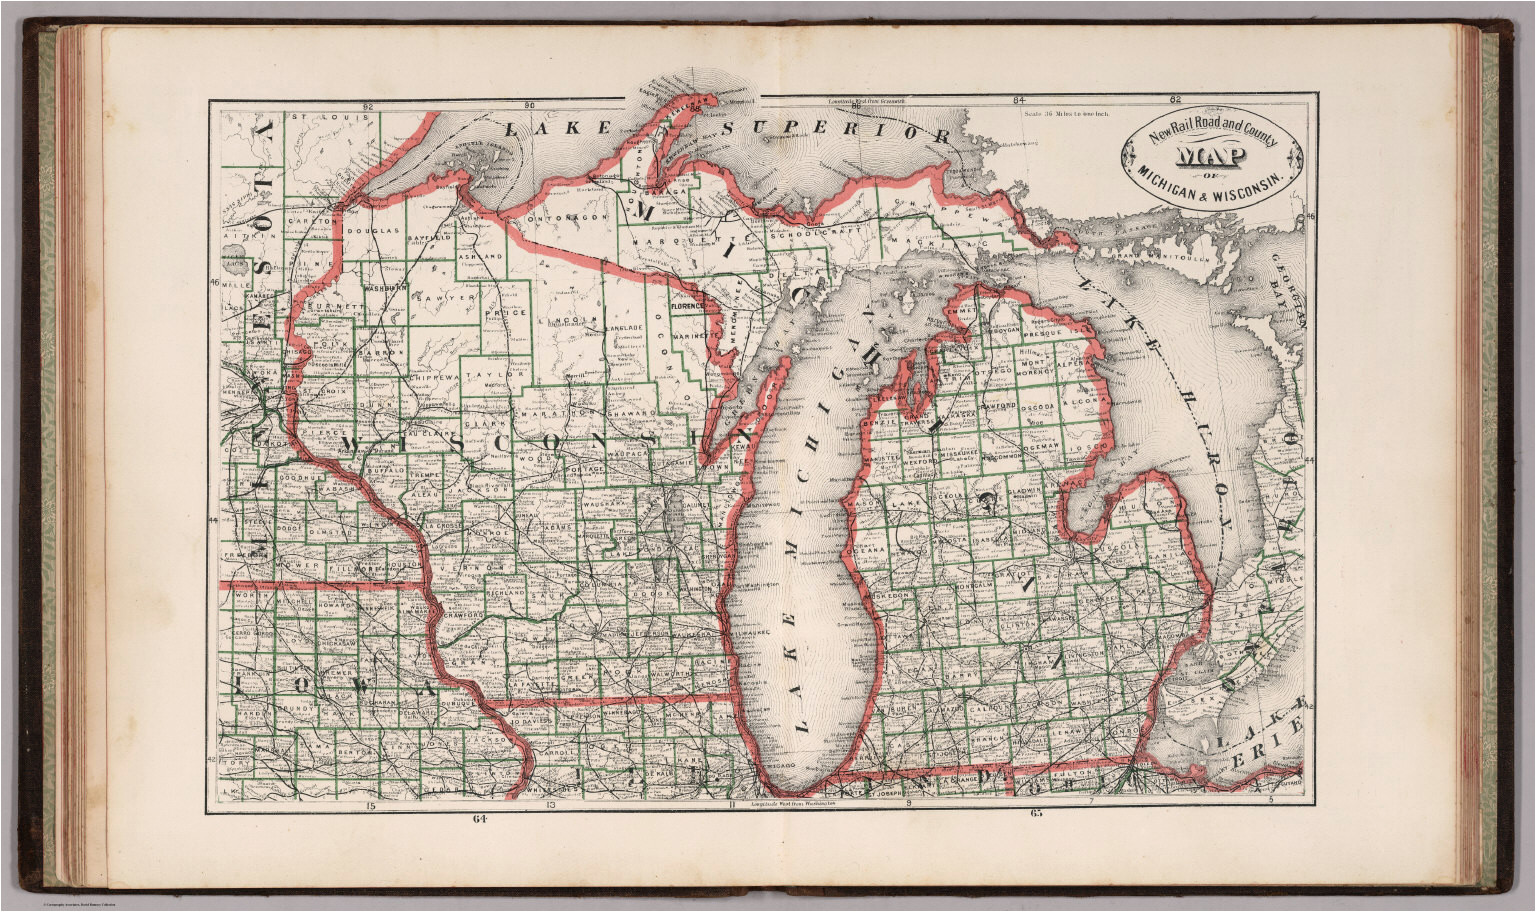 new rail road and county map of michigan and wisconsin david